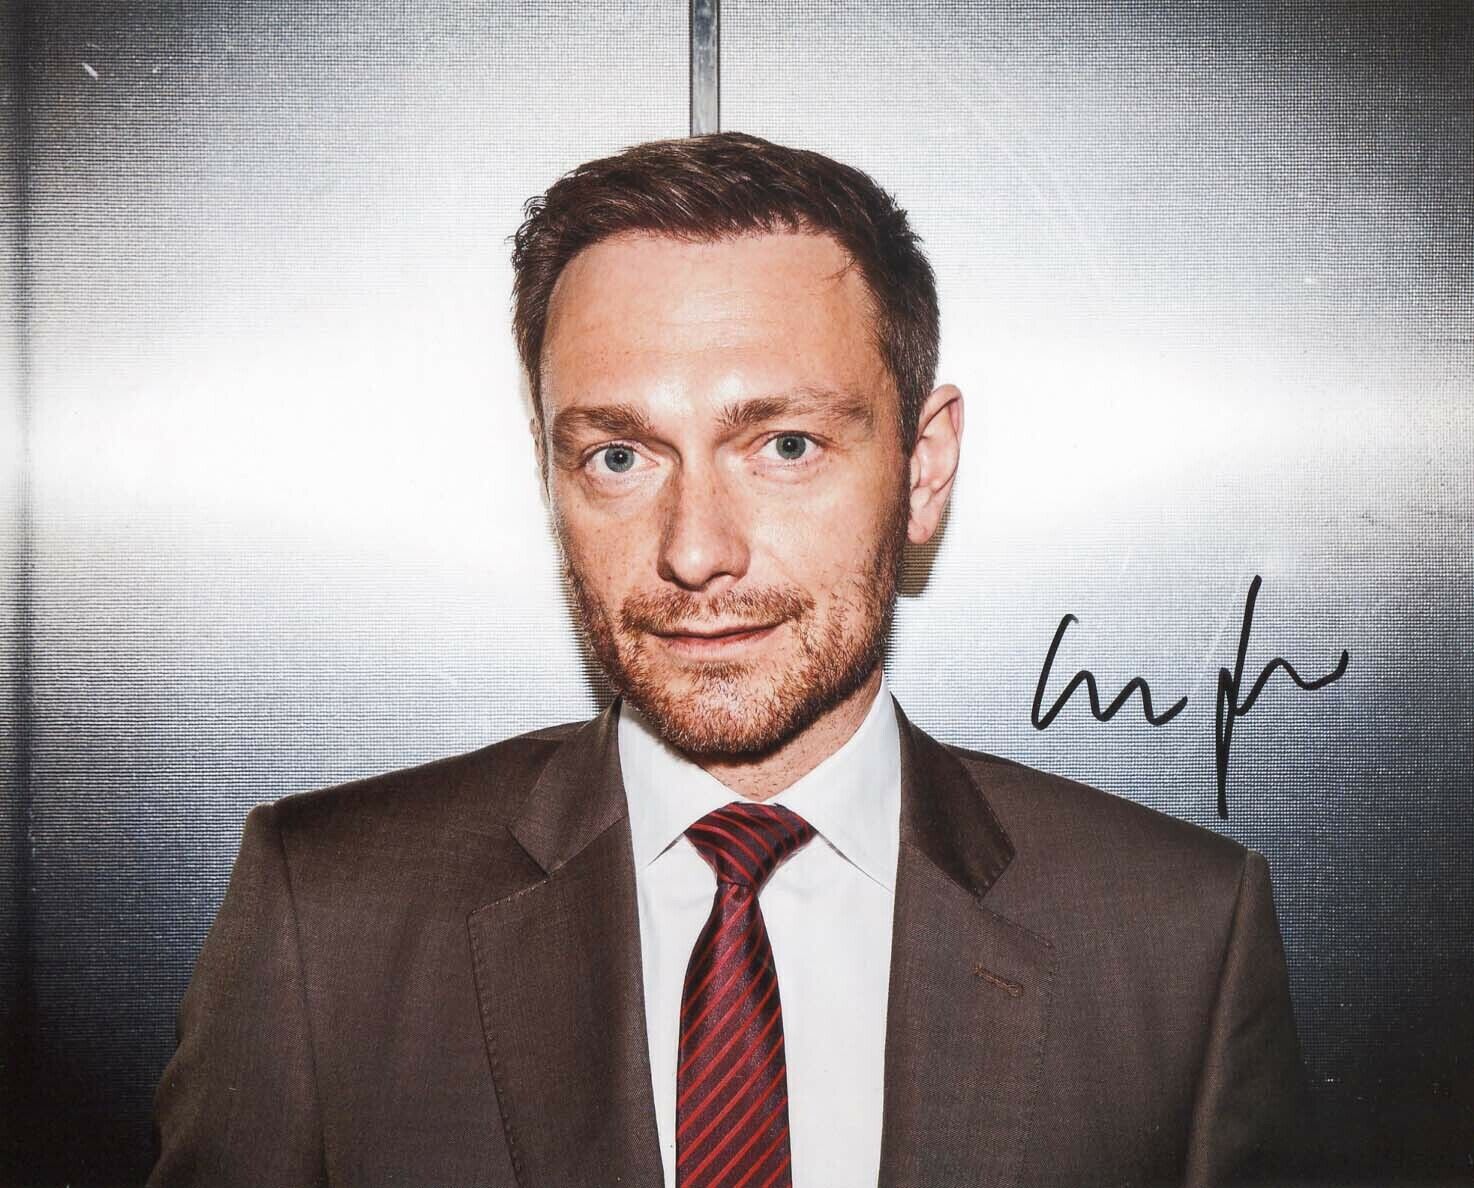 FDP POLITICIAN Christian Lindner autograph, IP signed Photo Poster painting